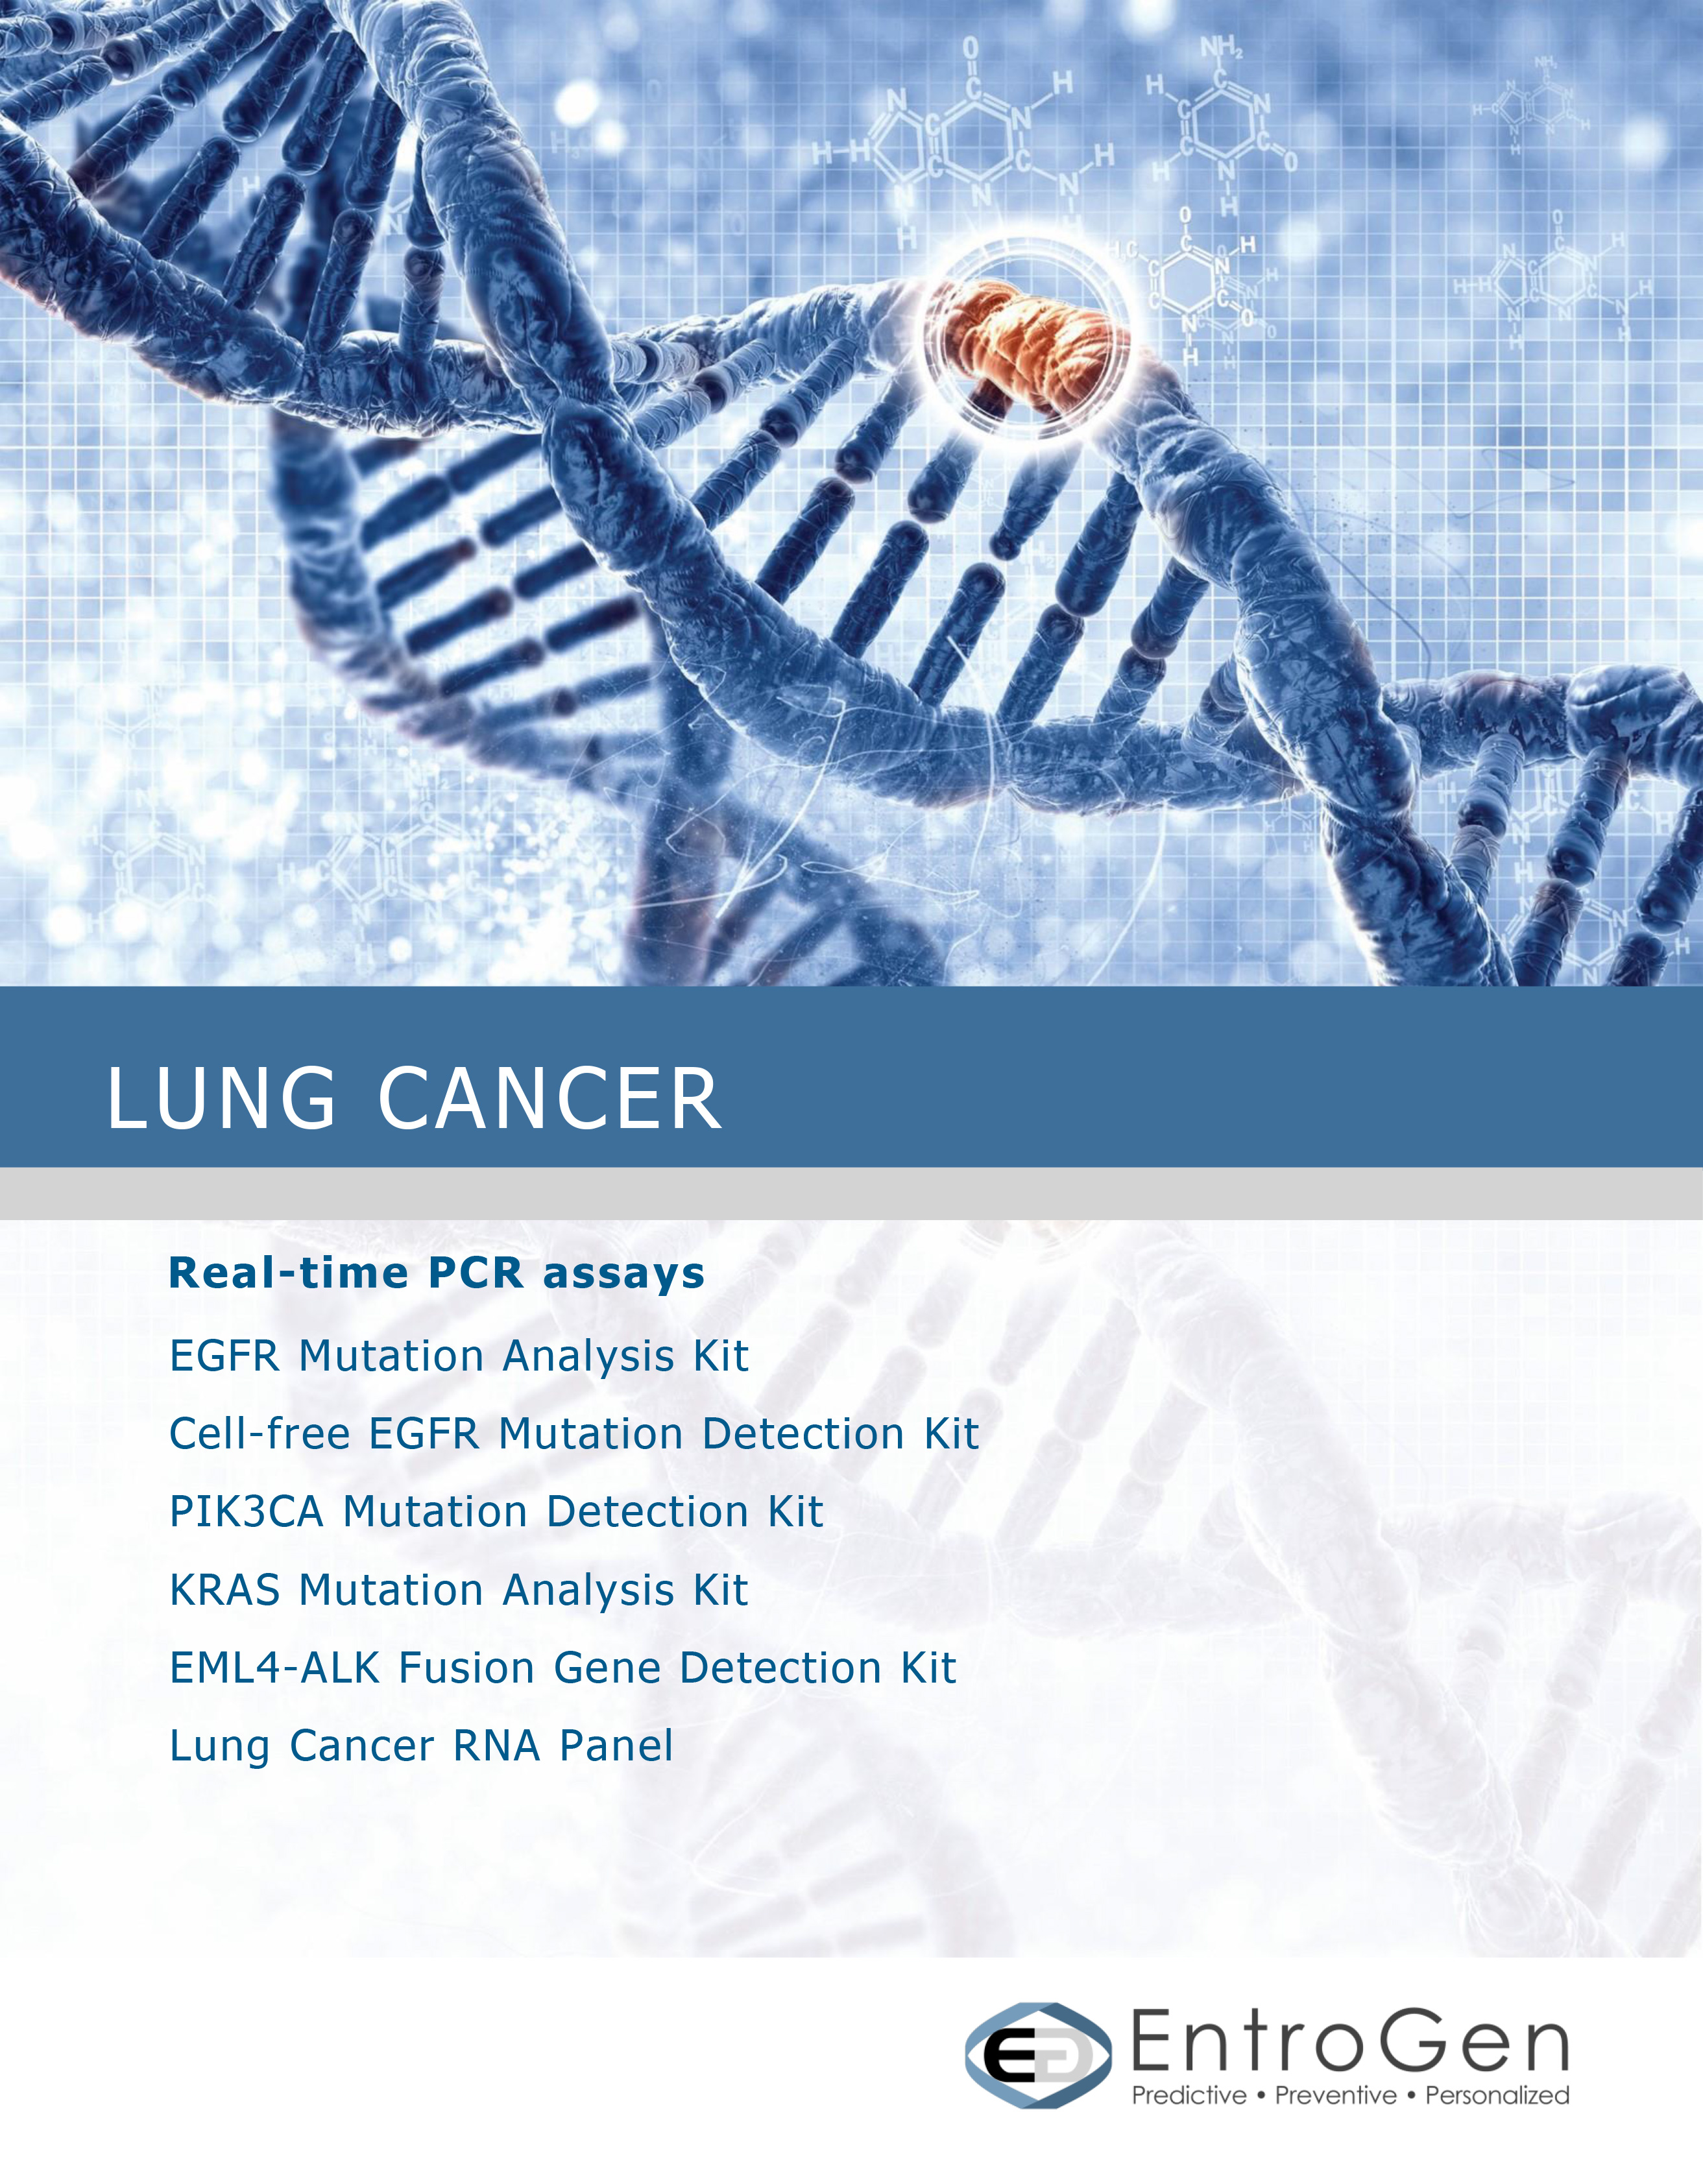 Lung Cancer RNA Panel